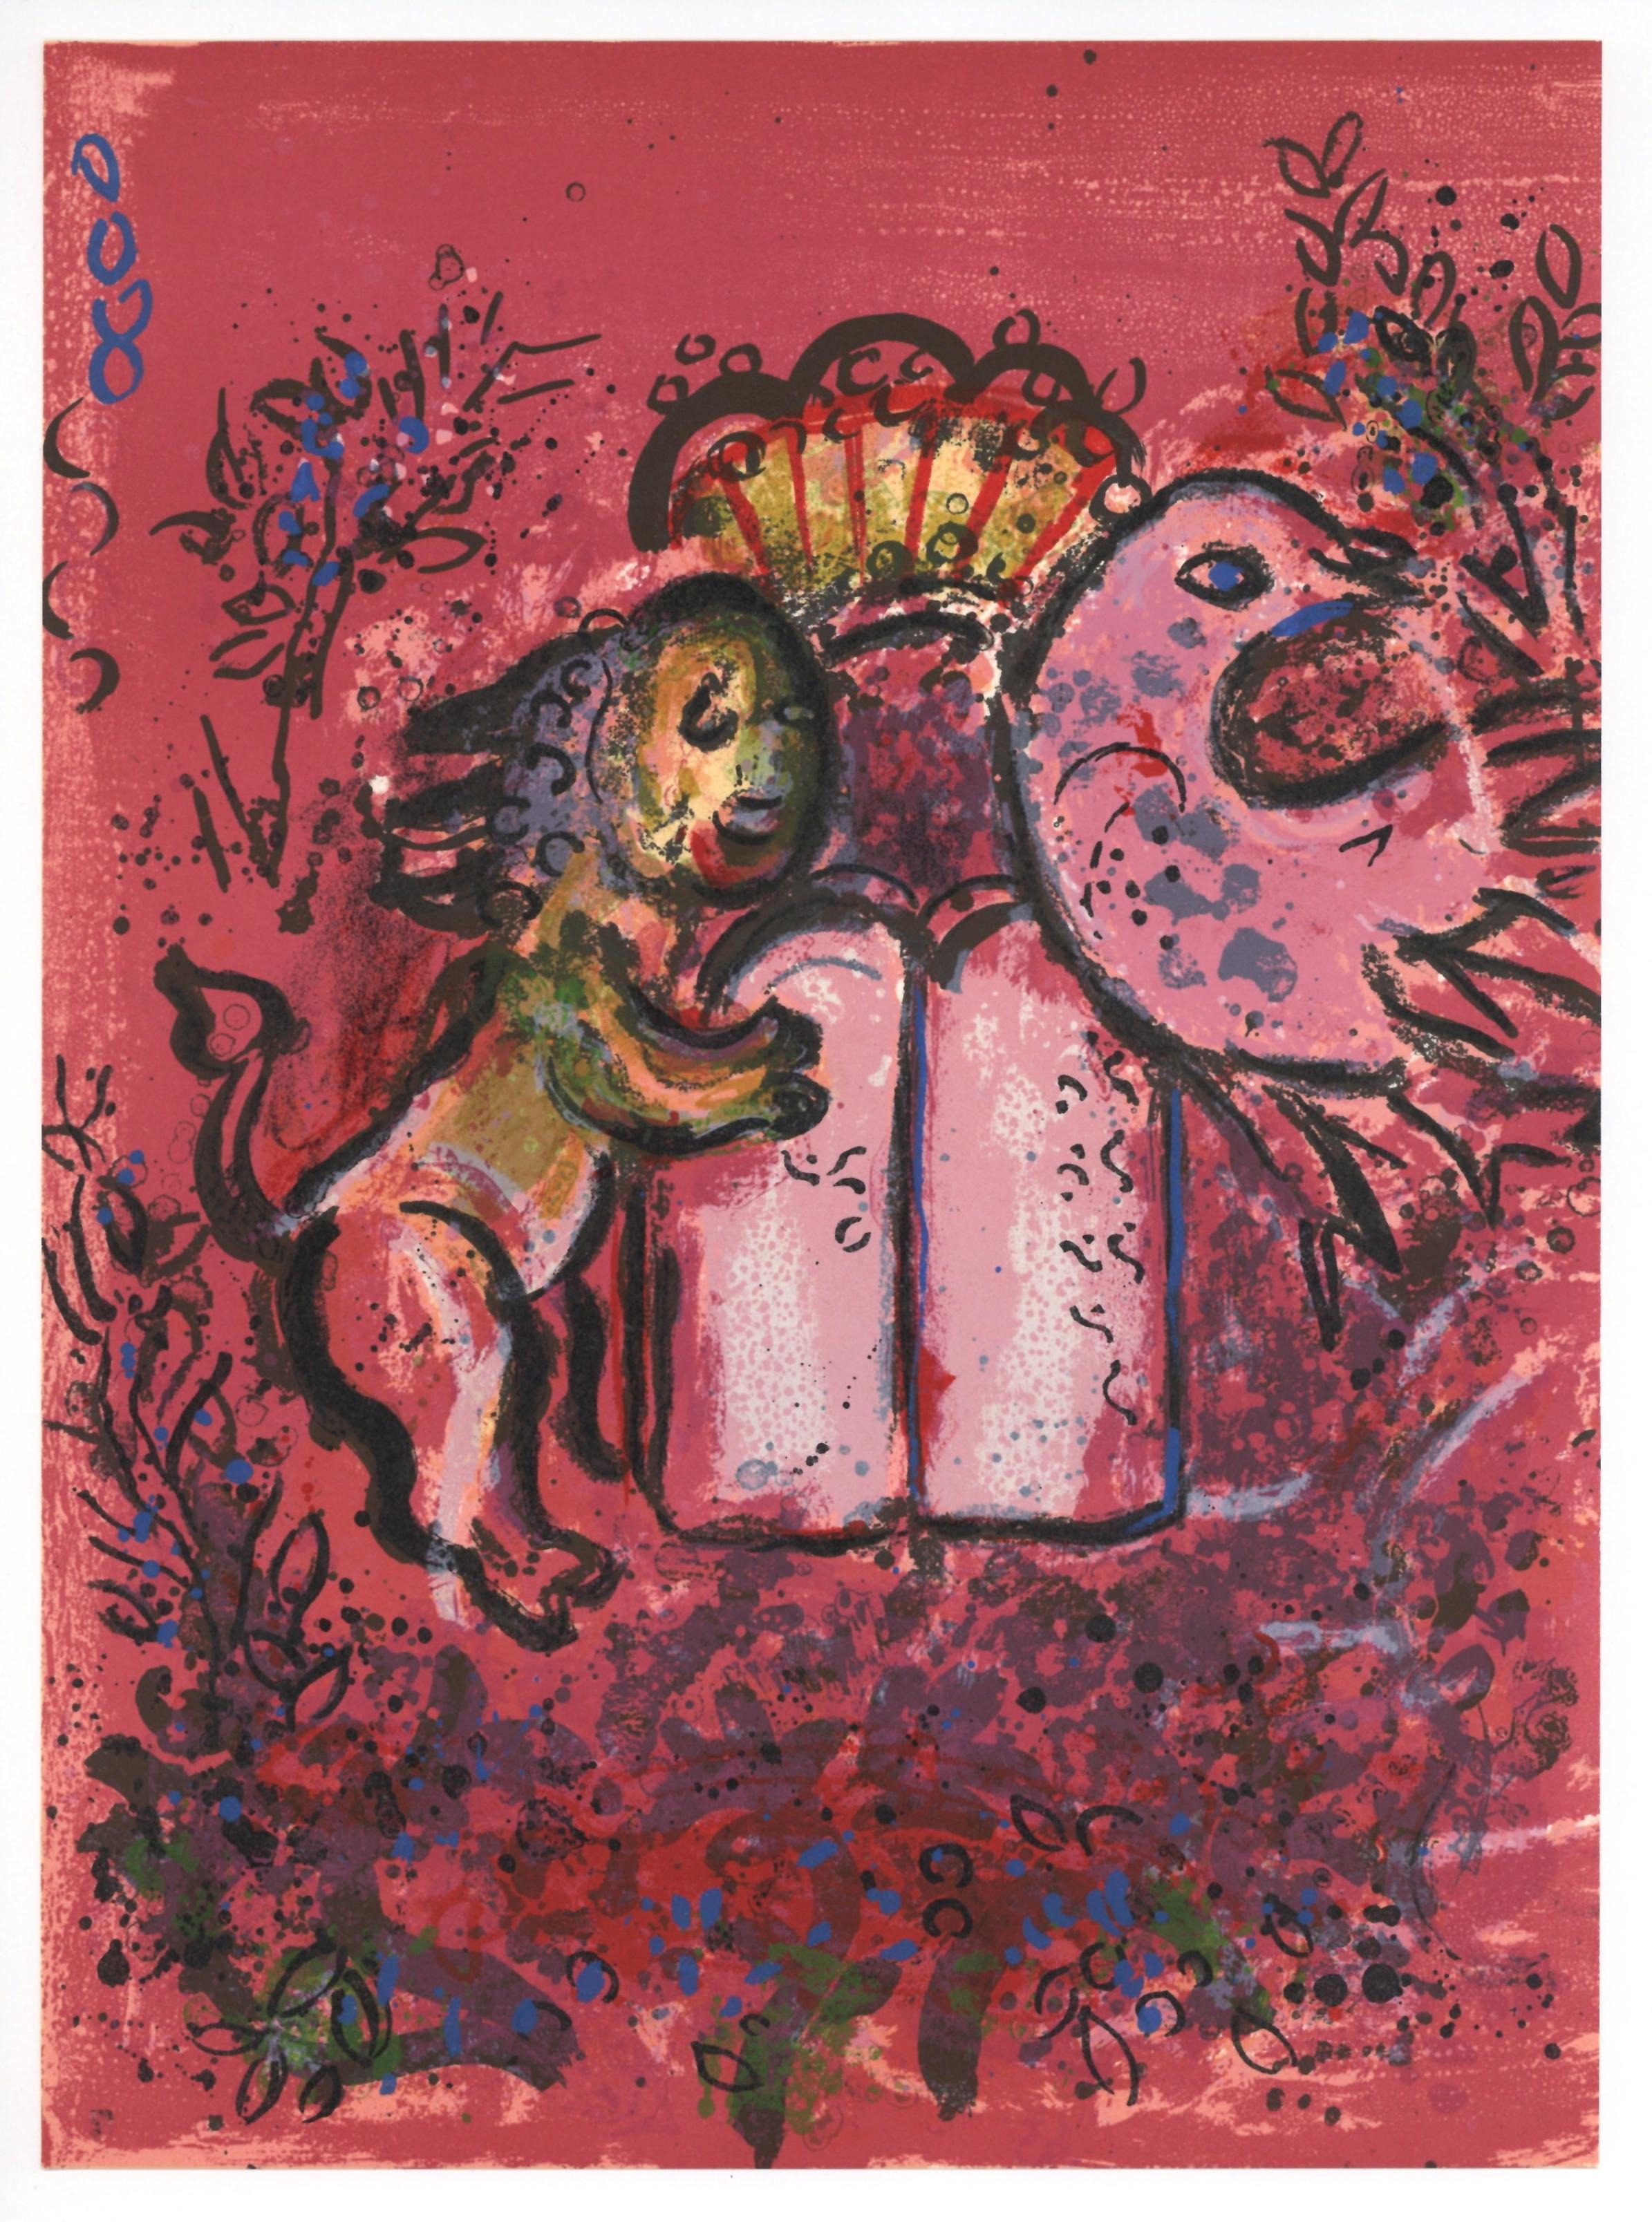 "Tablets of Law" original lithograph - Print by Marc Chagall